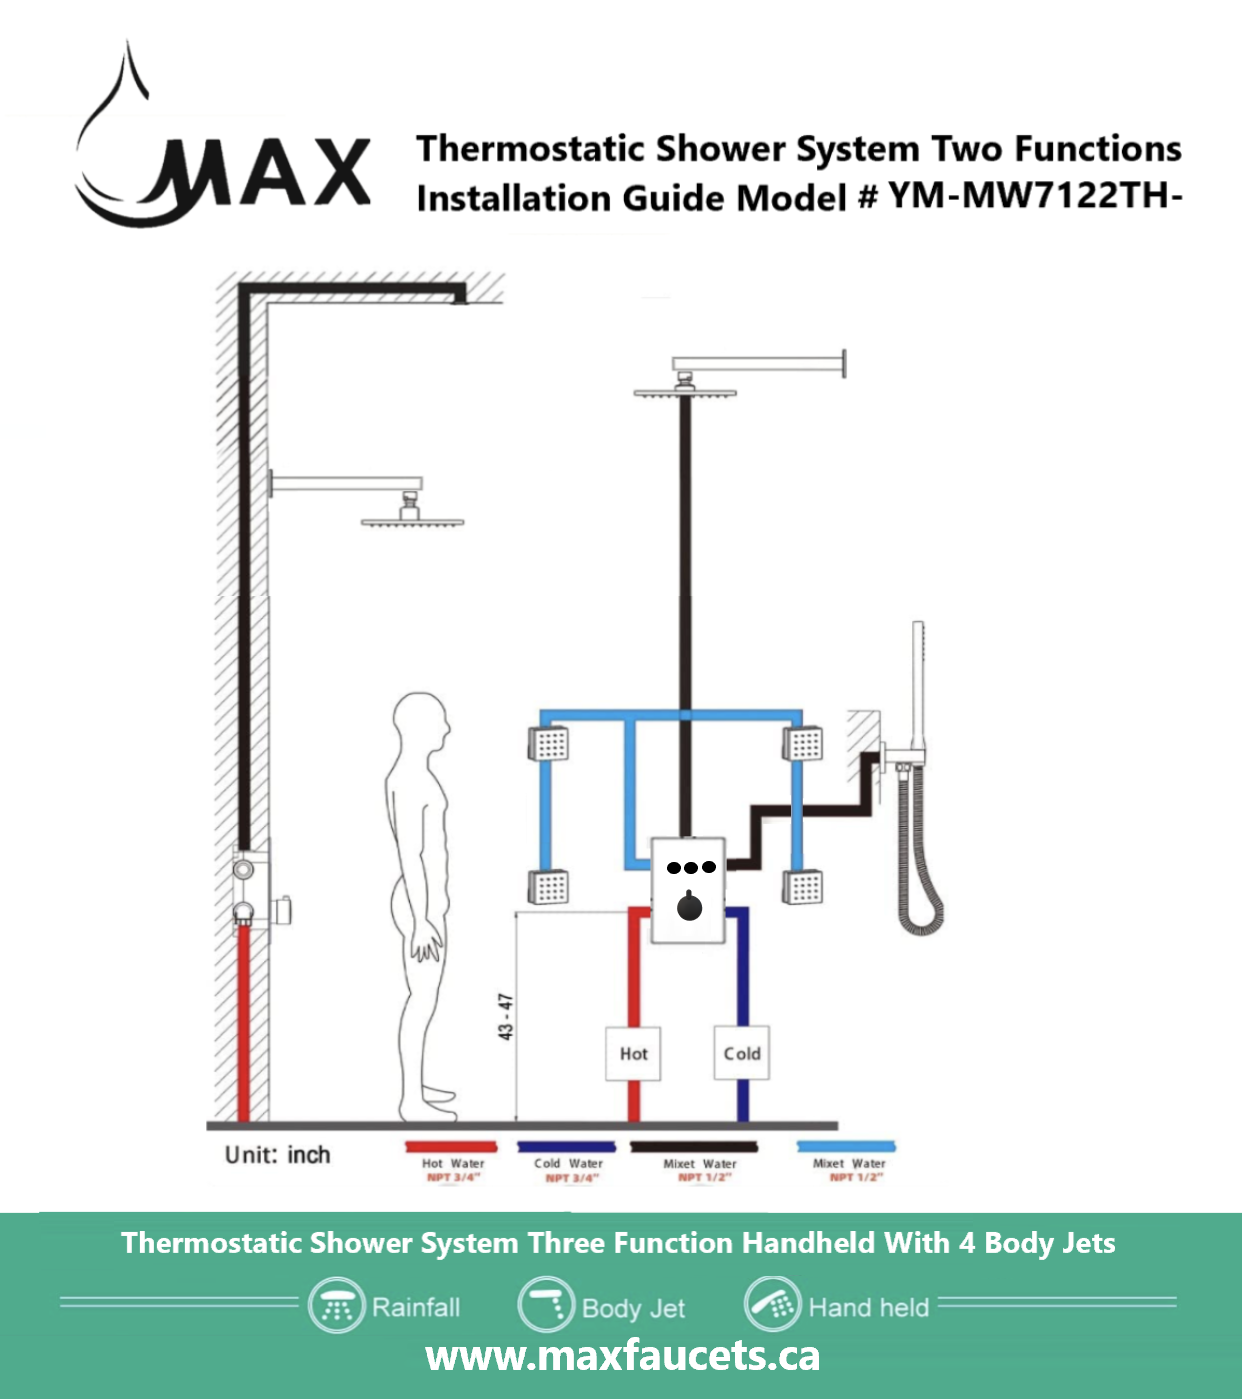 Thermostatic Shower System Three Function Handheld With 4 Body Jets and Valve Matte Black Finish